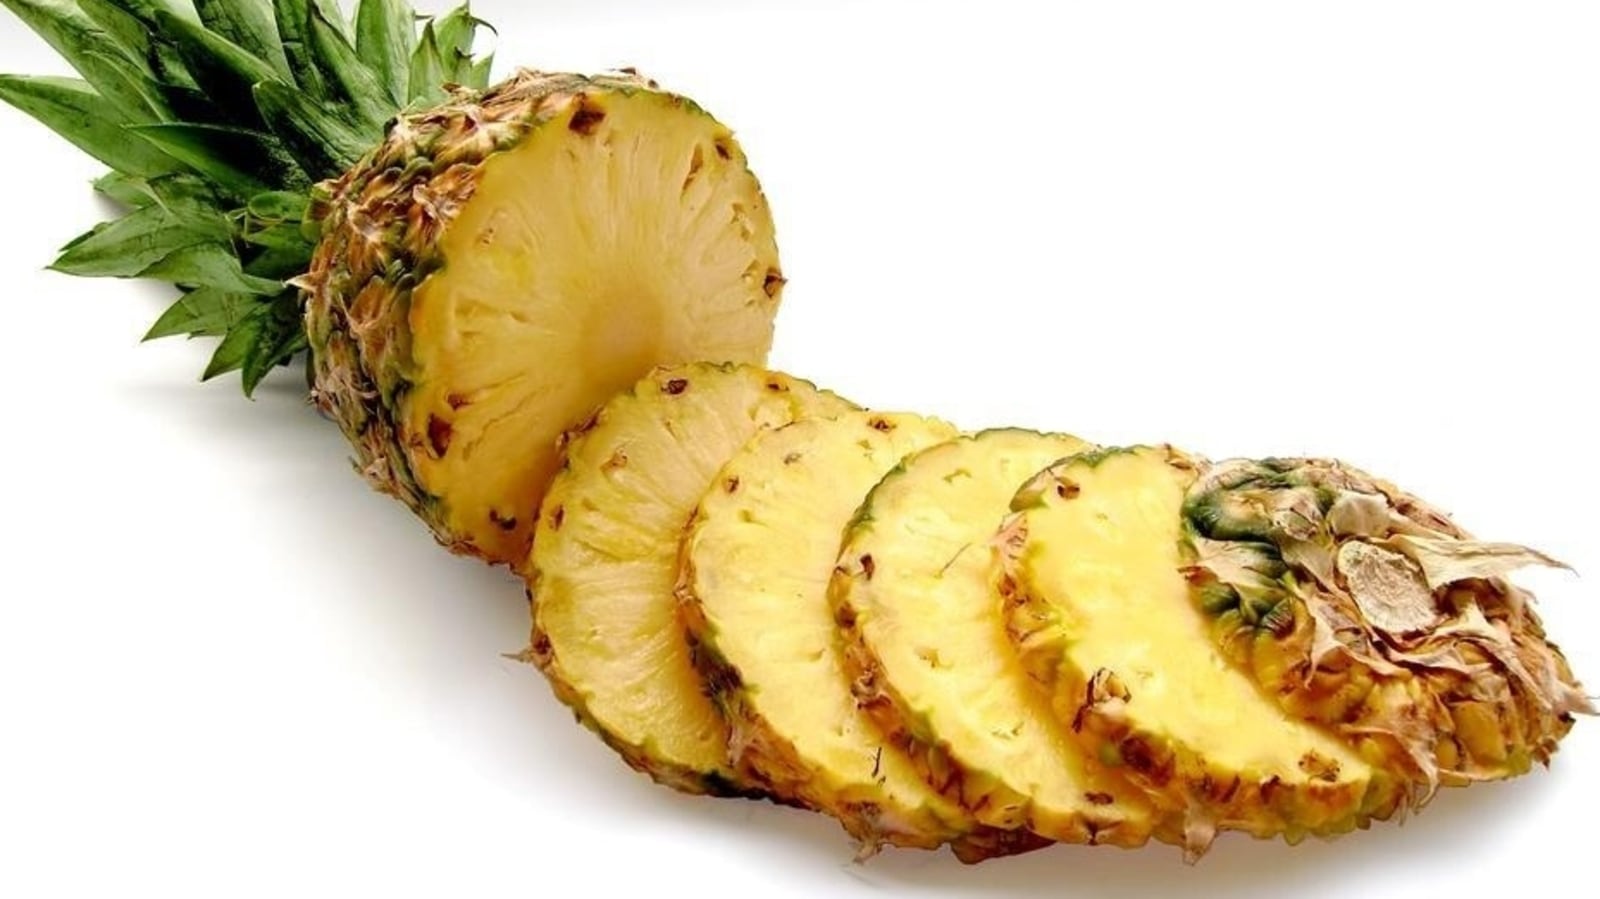 eating-nothing-but-pineapple-for-weight-loss-know-side-effects-from-dietician